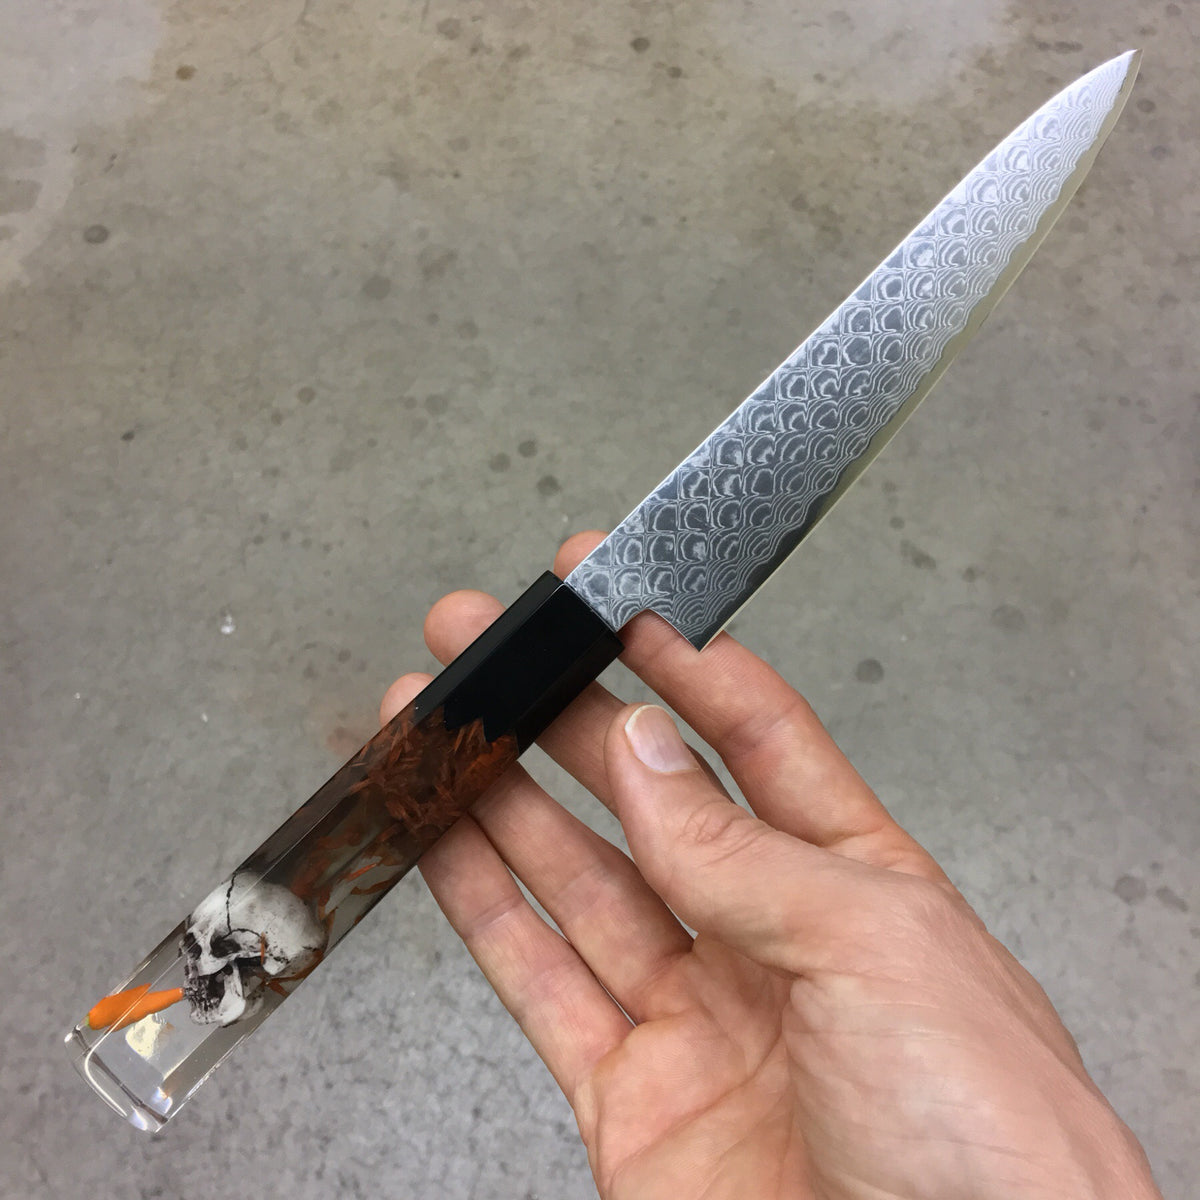 What’s Up Doc? - 6in Damascus Petty Culinary Knife